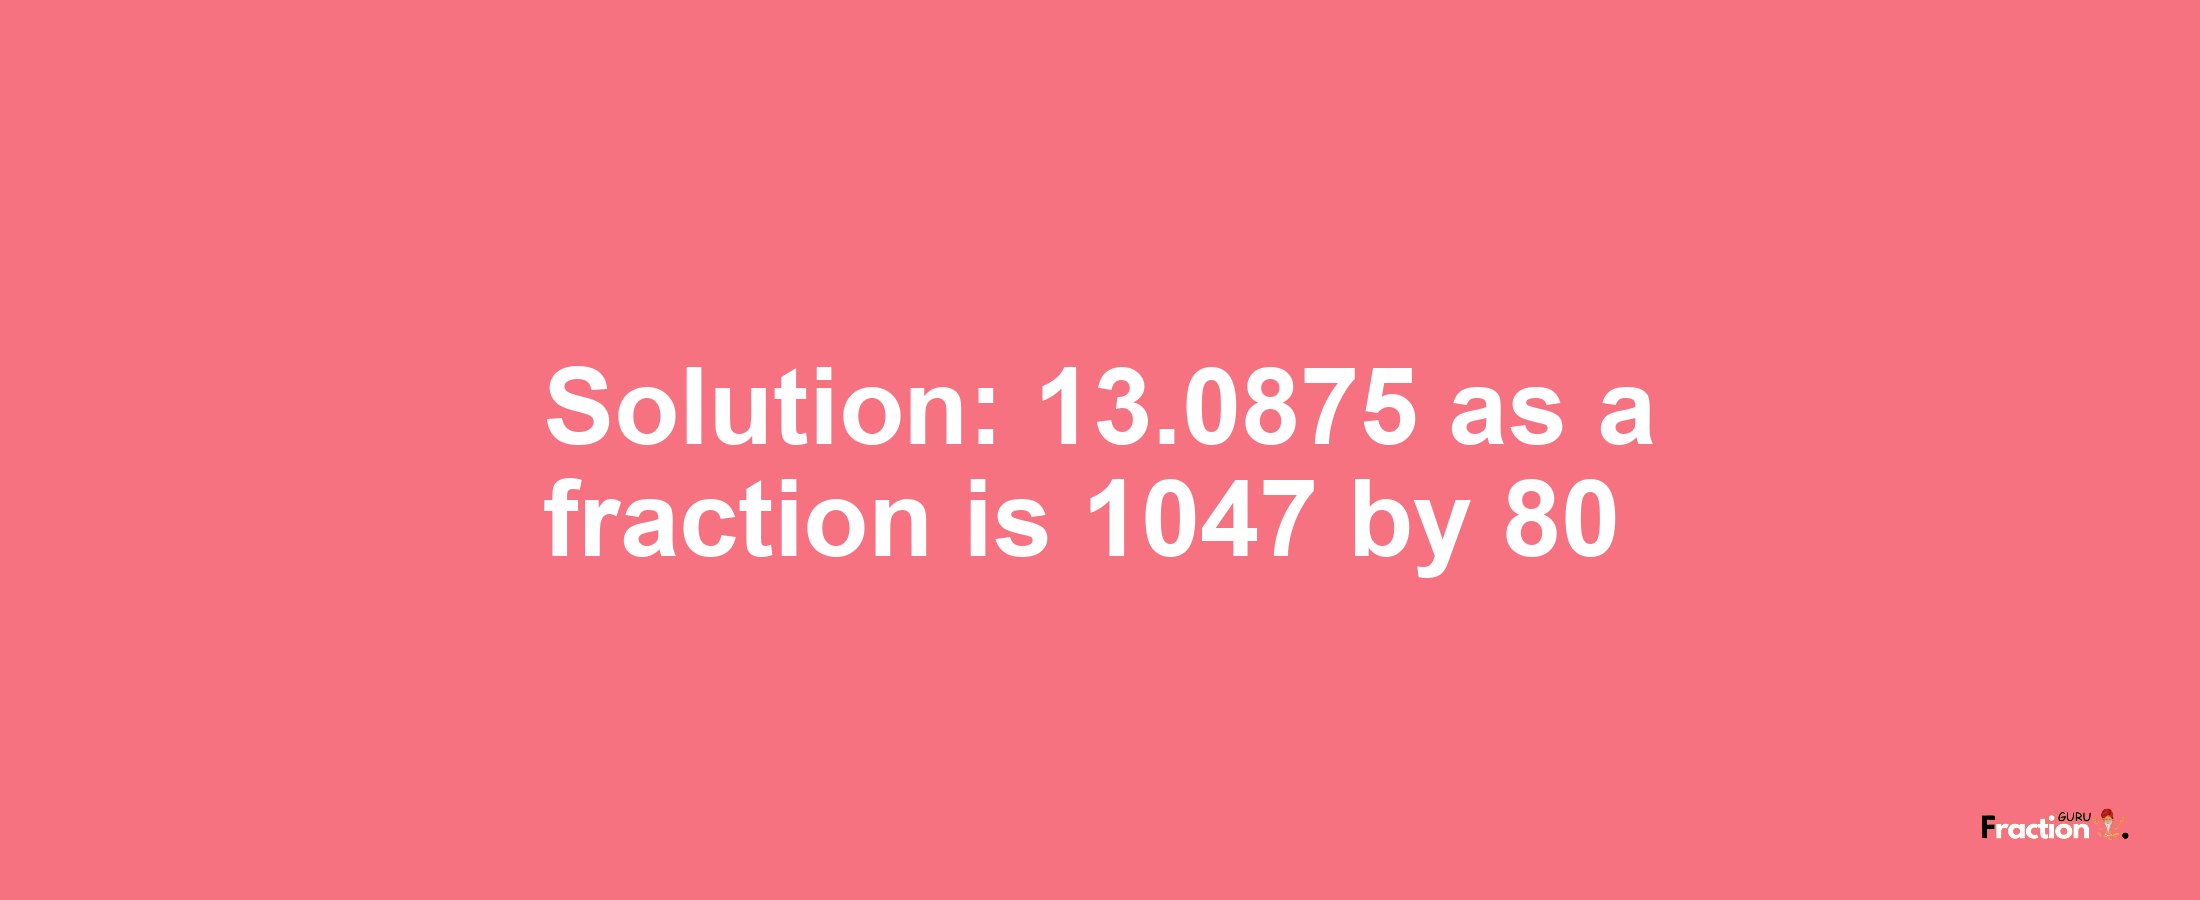 Solution:13.0875 as a fraction is 1047/80